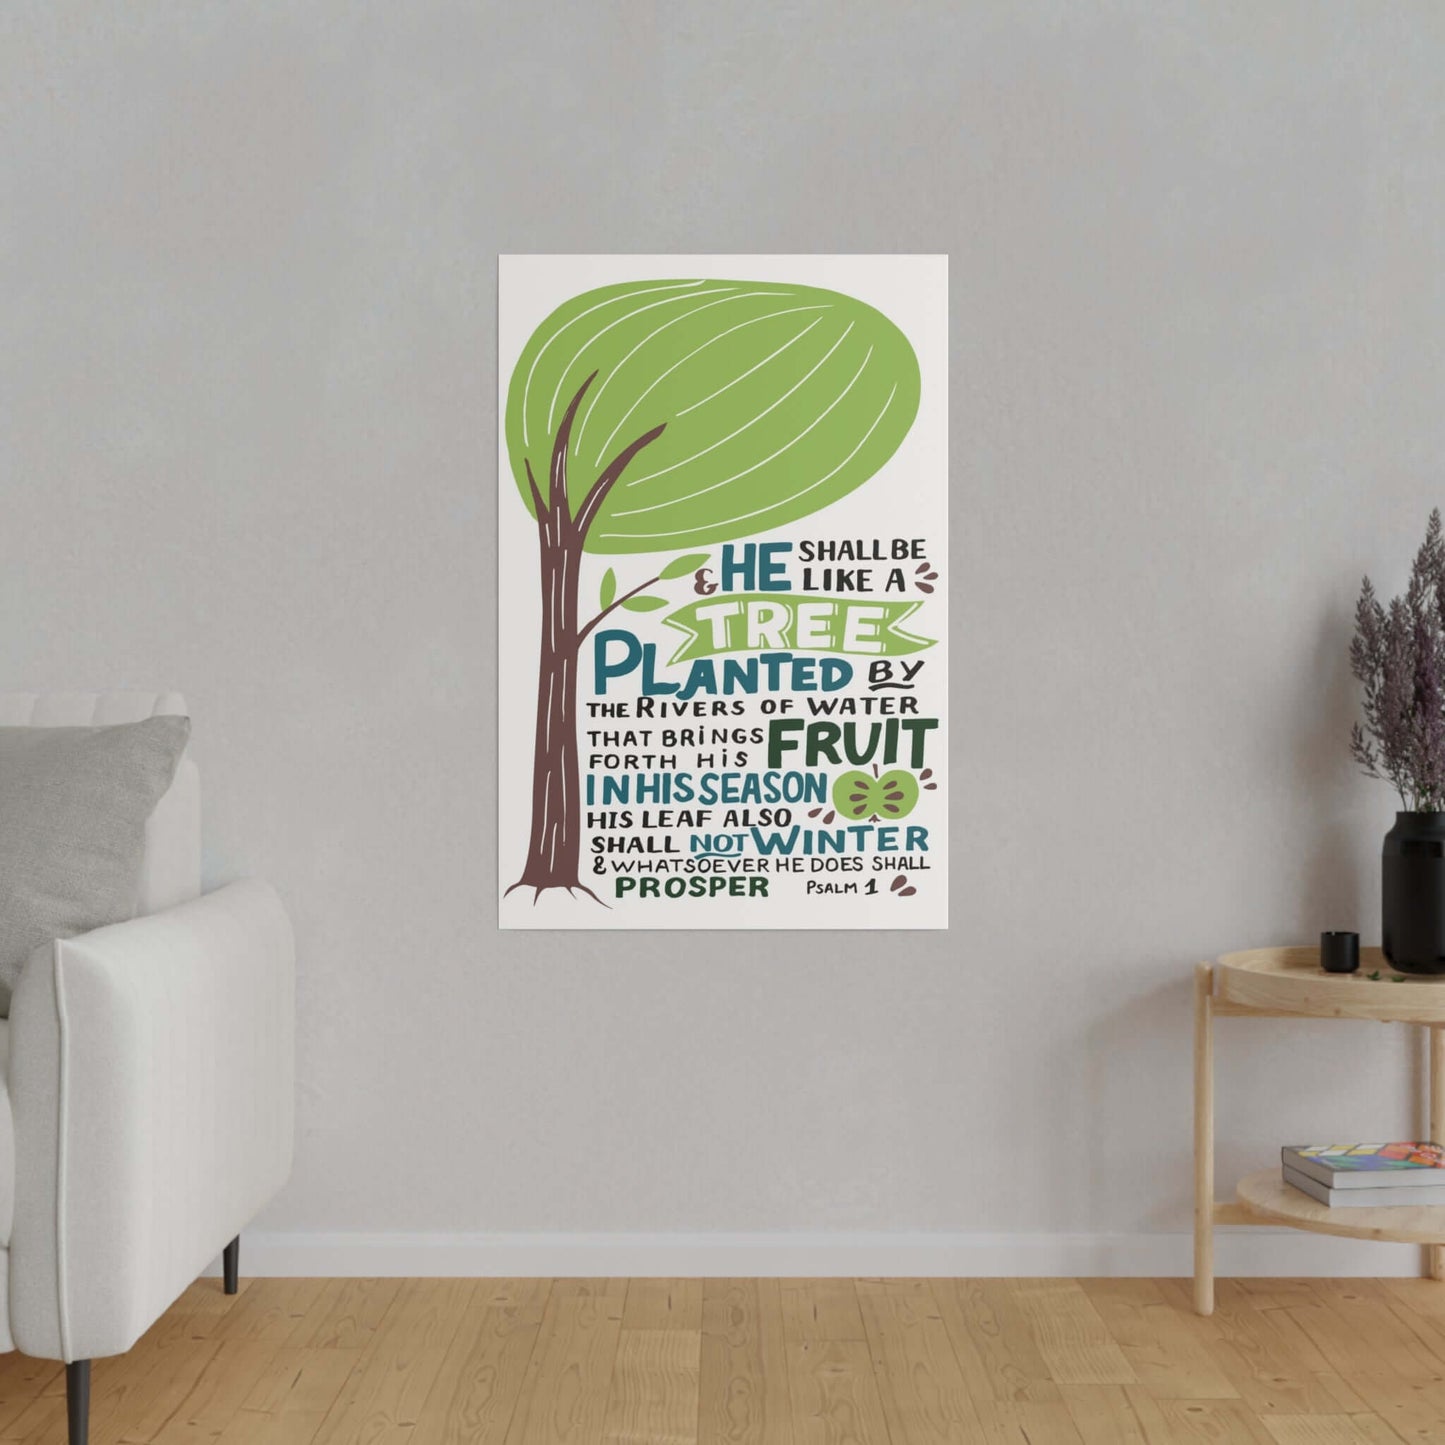 Unframed Painting Canvas with Psalm 1:3 - Durable & Eco-Friendly | Art & Wall Decor,Canvas,Decor,Eco-friendly,Hanging Hardware,Holiday Picks,Home & Living,Indoor,Matte,Seasonal Picks,Sustainable,Wall,Wood